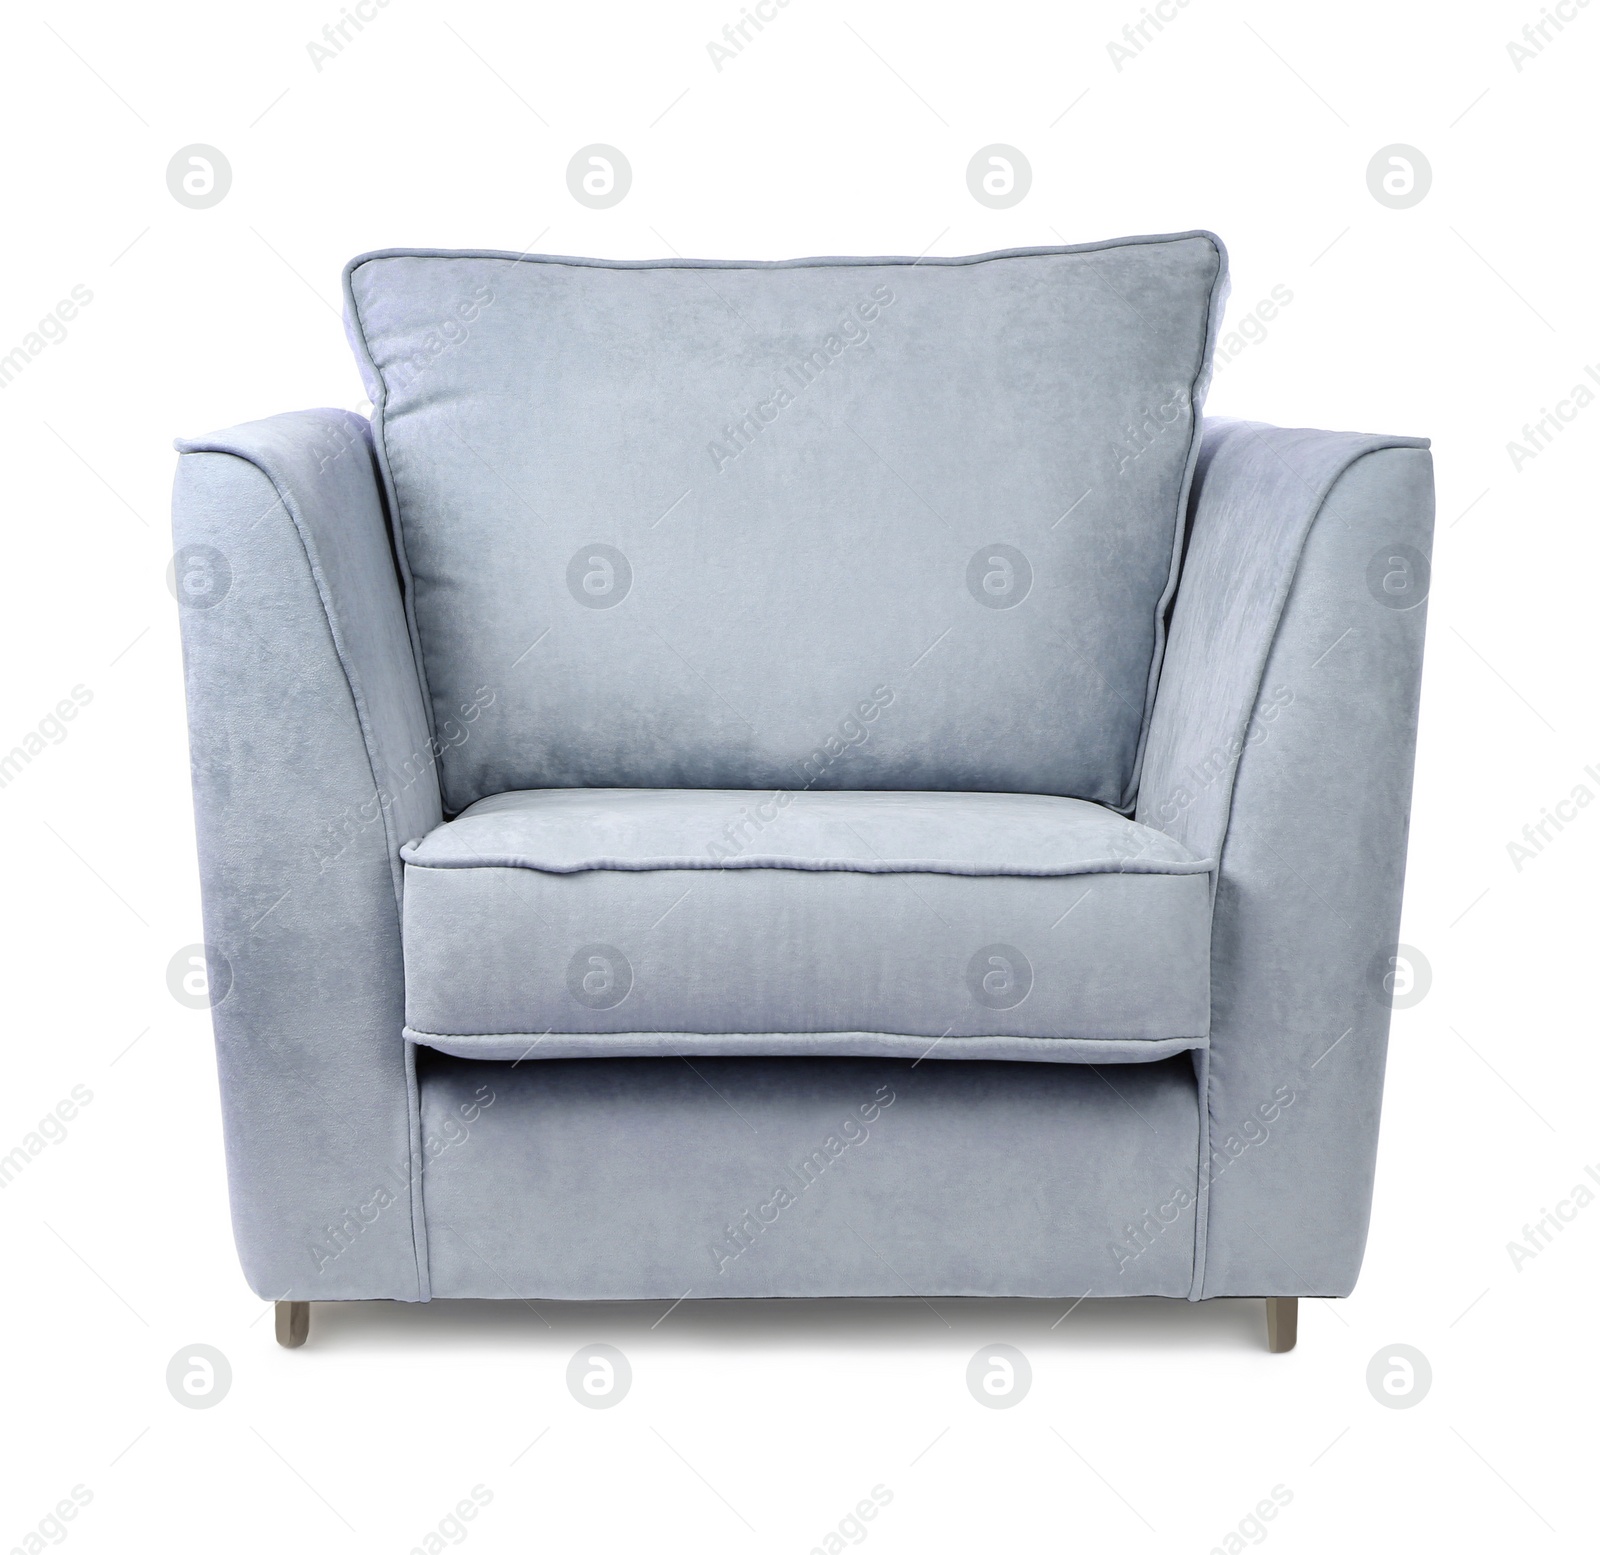 Image of One comfortable grayish blue armchair isolated on white